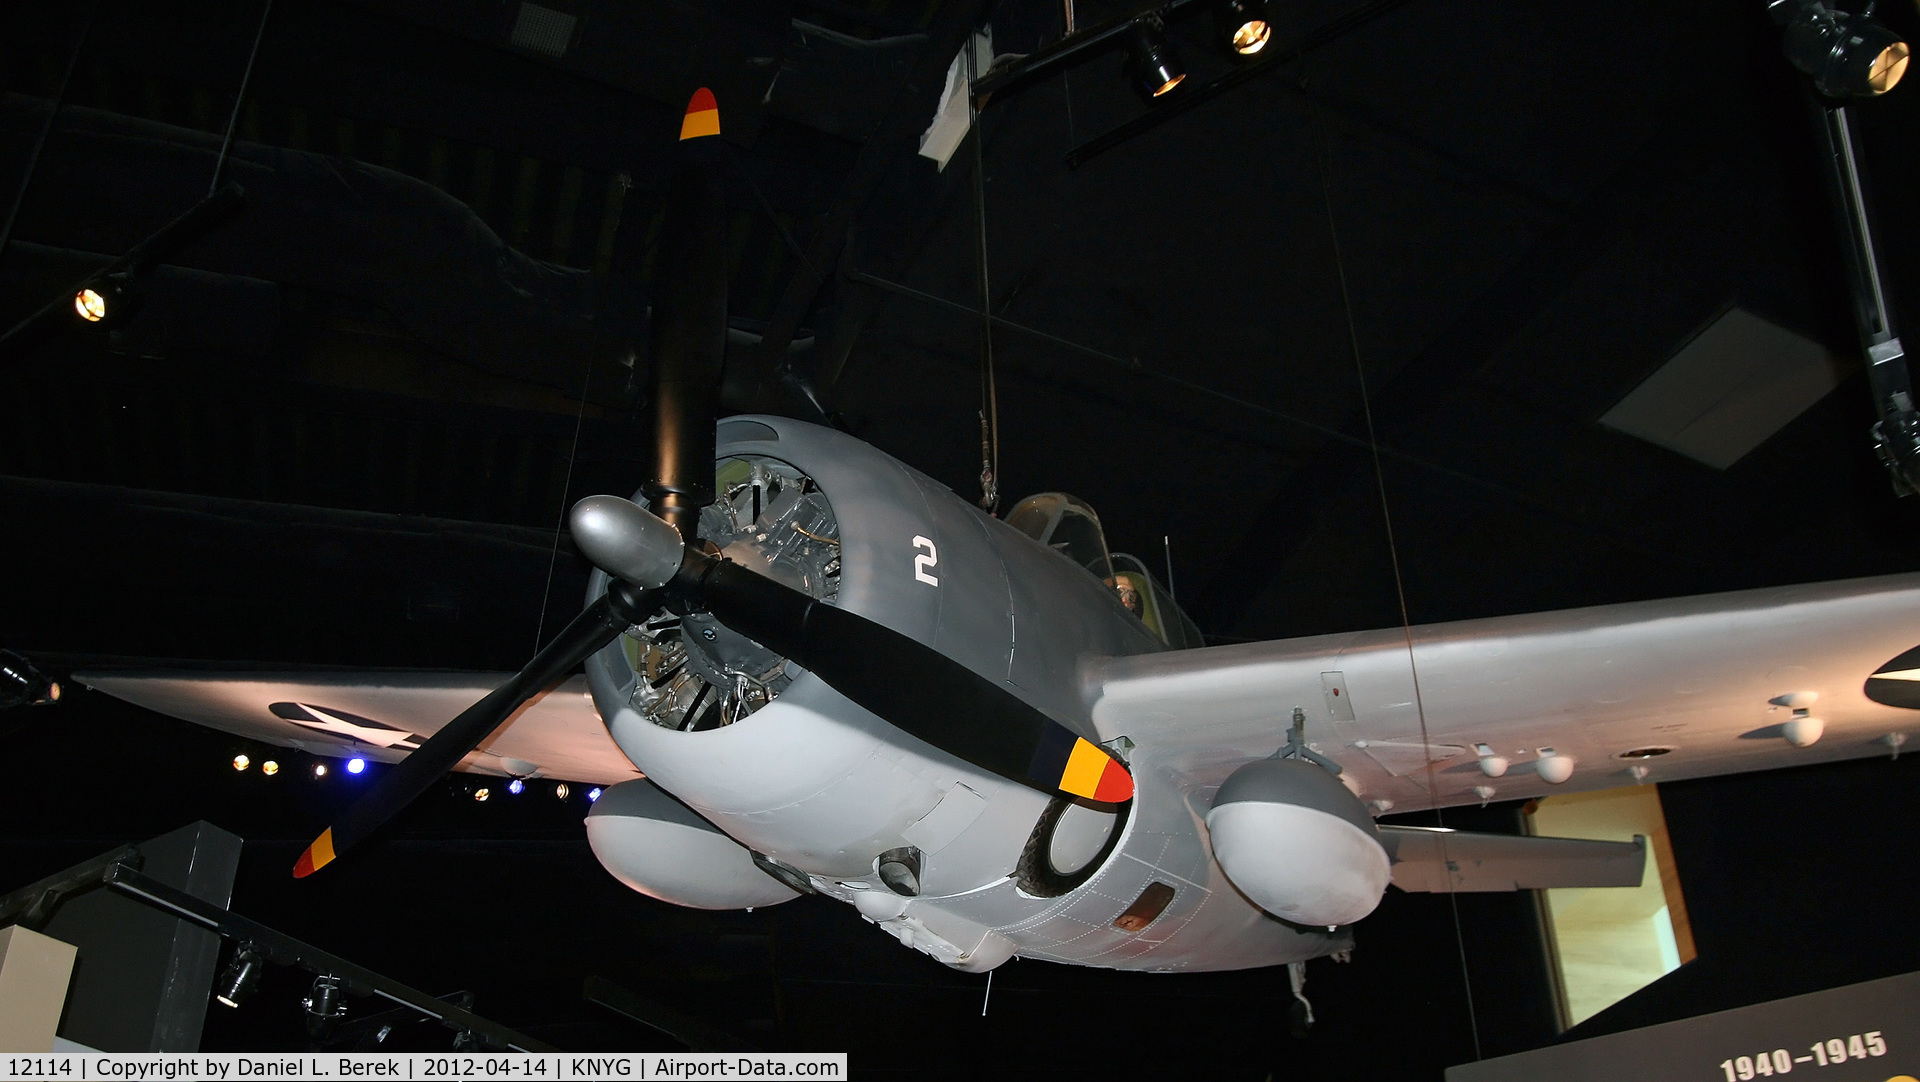 12114, Grumman F4F-4 Martlet IV C/N 3809, This rare USMC Wildcat is part of the National Museum of the Marine Corps, Quantico.